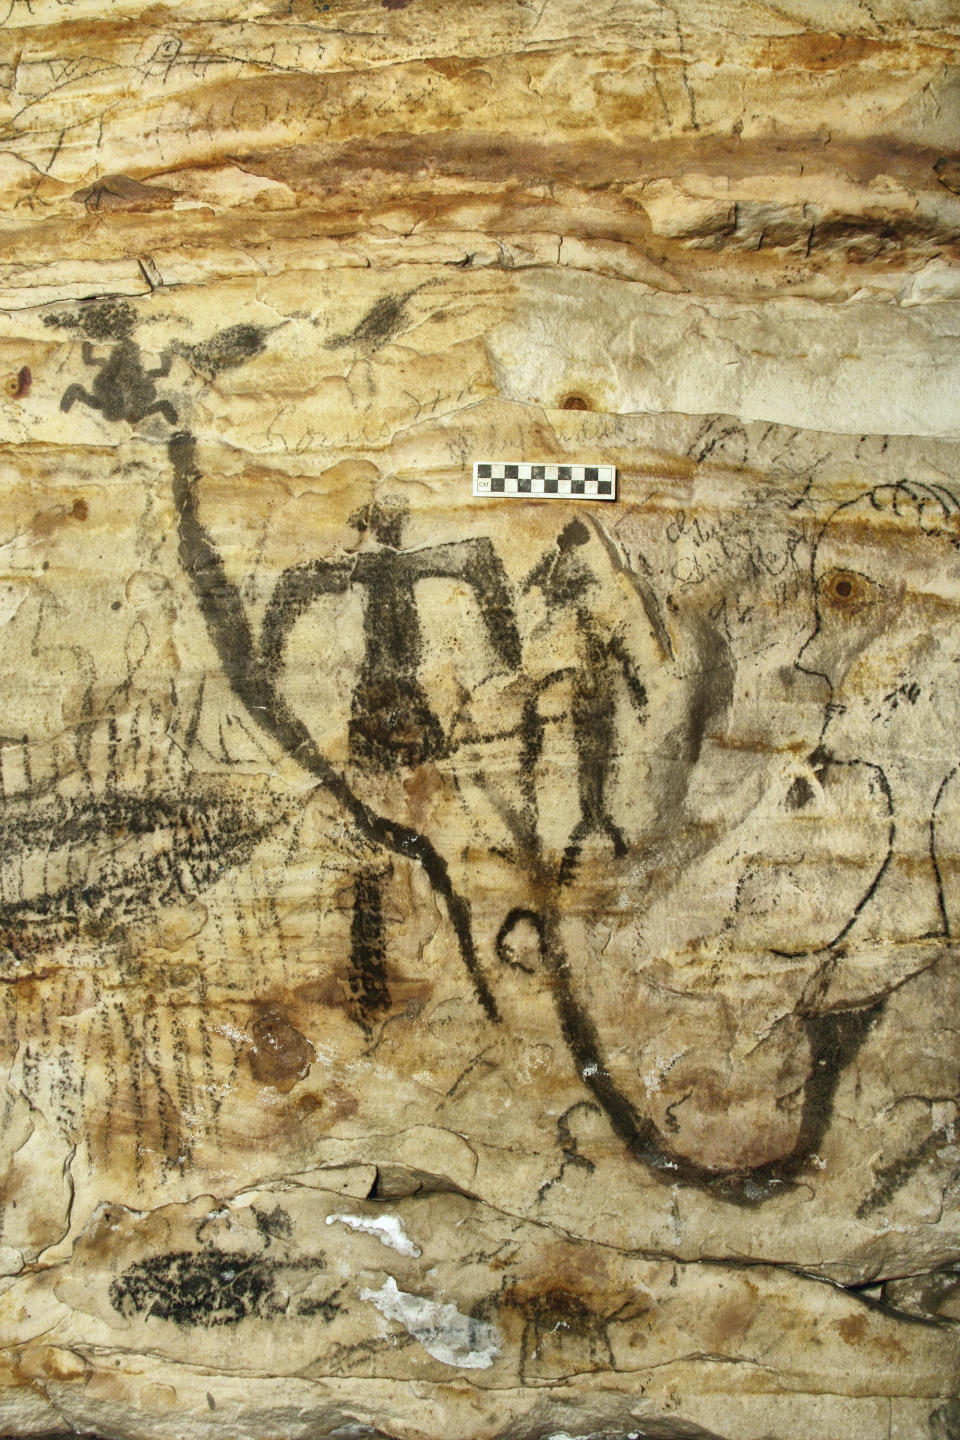 This undated photo provided by Alan Cressler shows a Missouri cave featuring artwork from the Osage Nation dating more than 1,000 years was sold at auction on Tuesday, Sept. 14, 2021. The art inside "Picture Cave" shows humans, animals and mythical creatures. Experts who have studied the cave were concerned about the auction, but the director of the auction company said protections are in place to prohibit the new buyer from exploiting the cave, including a Missouri law that makes doing so a crime. (Alan Cressler via AP)